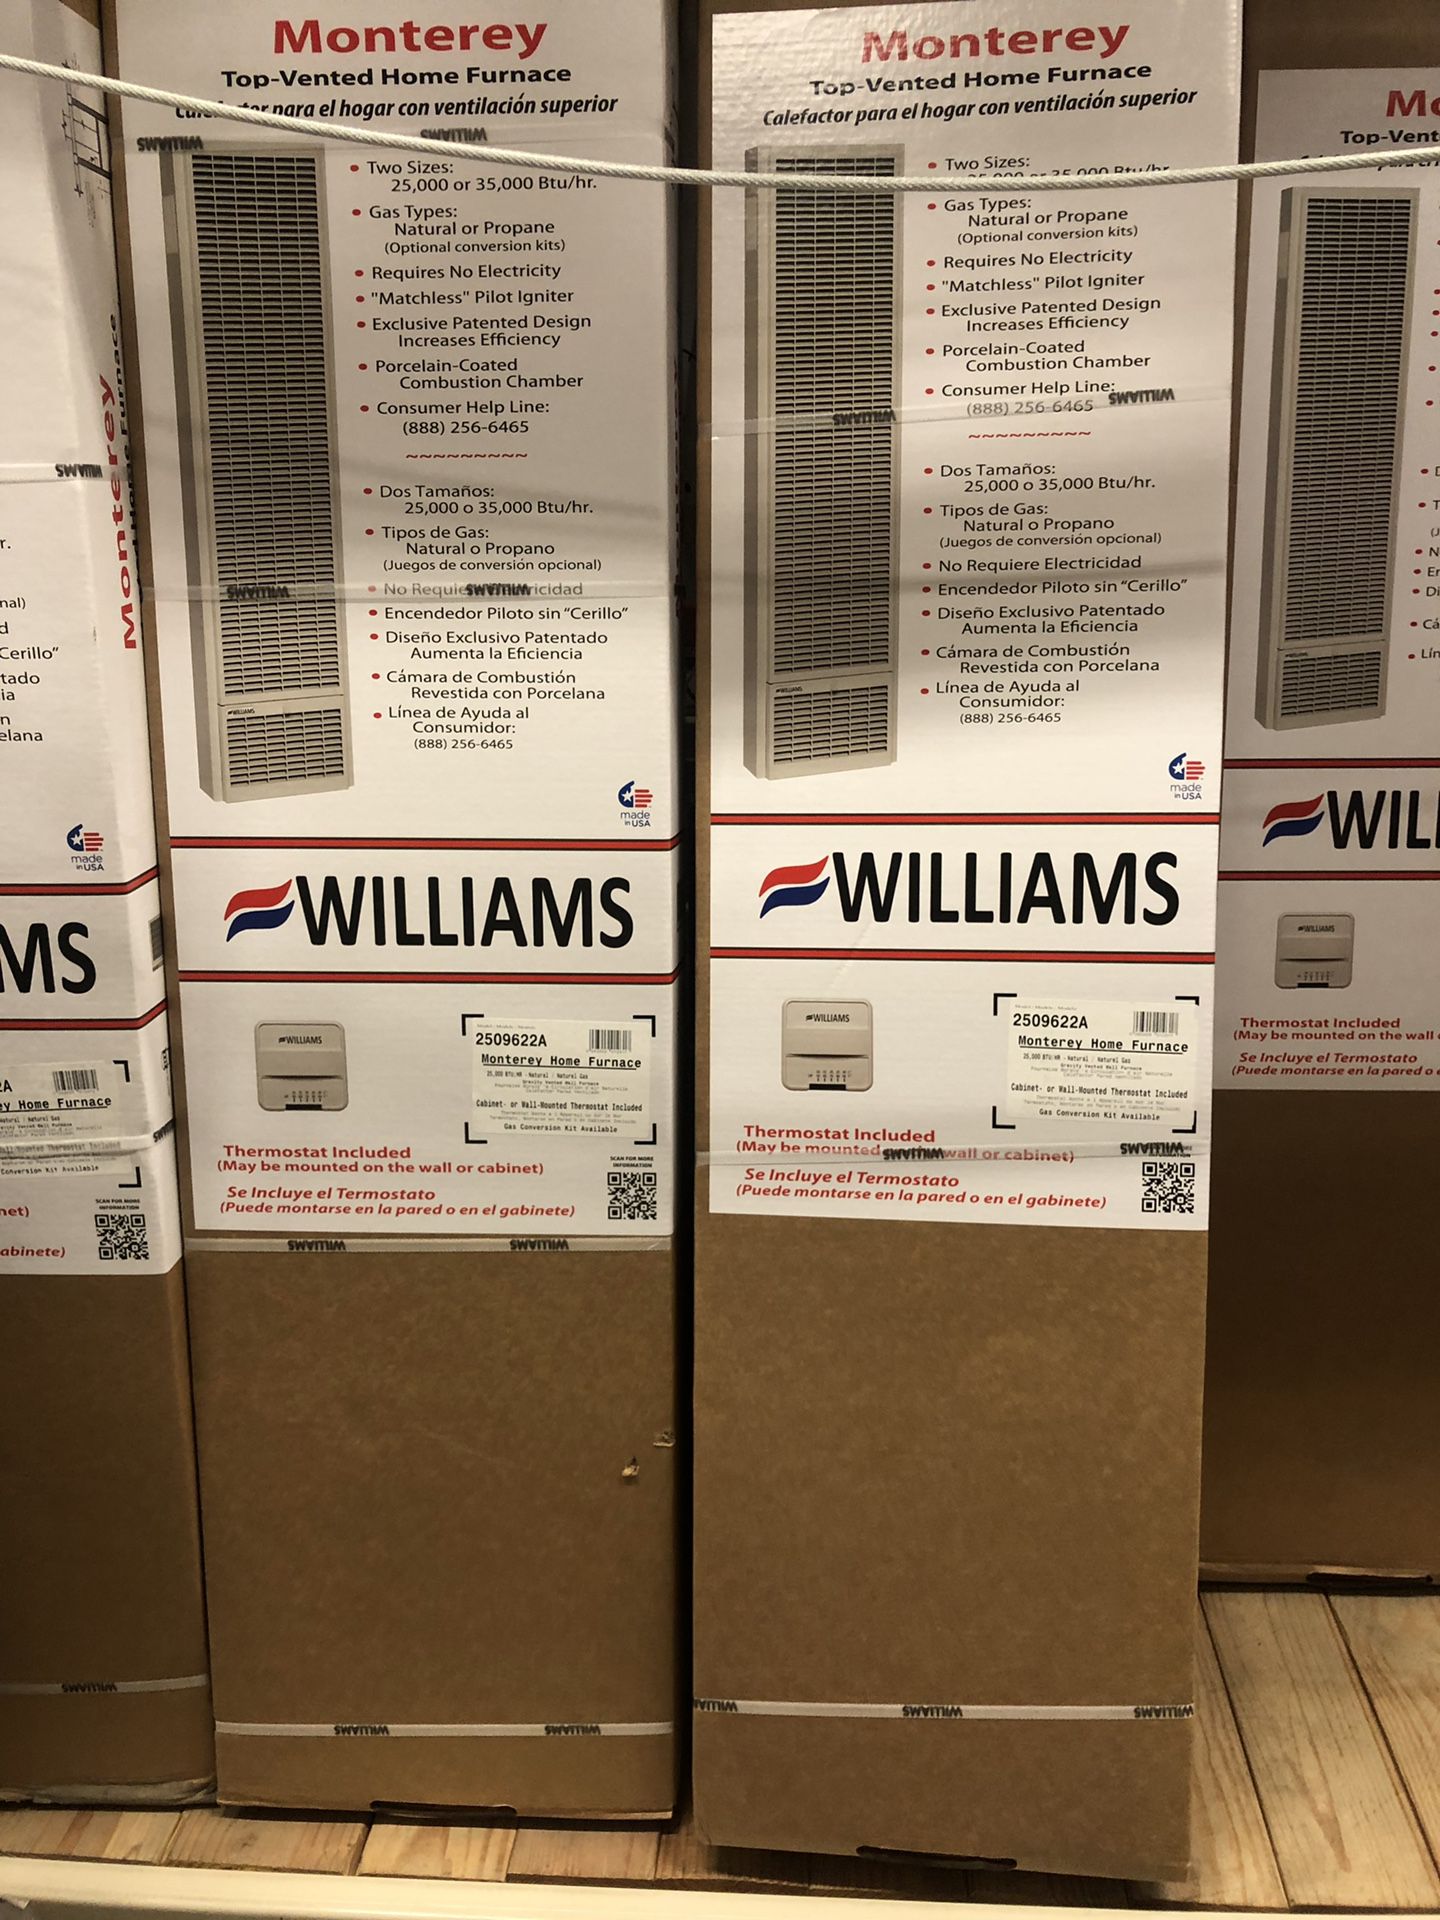 WILLIAMS 35.000 BTU/HOUR MONTEREY TOP VENT-GRAVITY FURNACE NATURAL GAS HEATER WITH WALL OR CABINET mounted thermostat